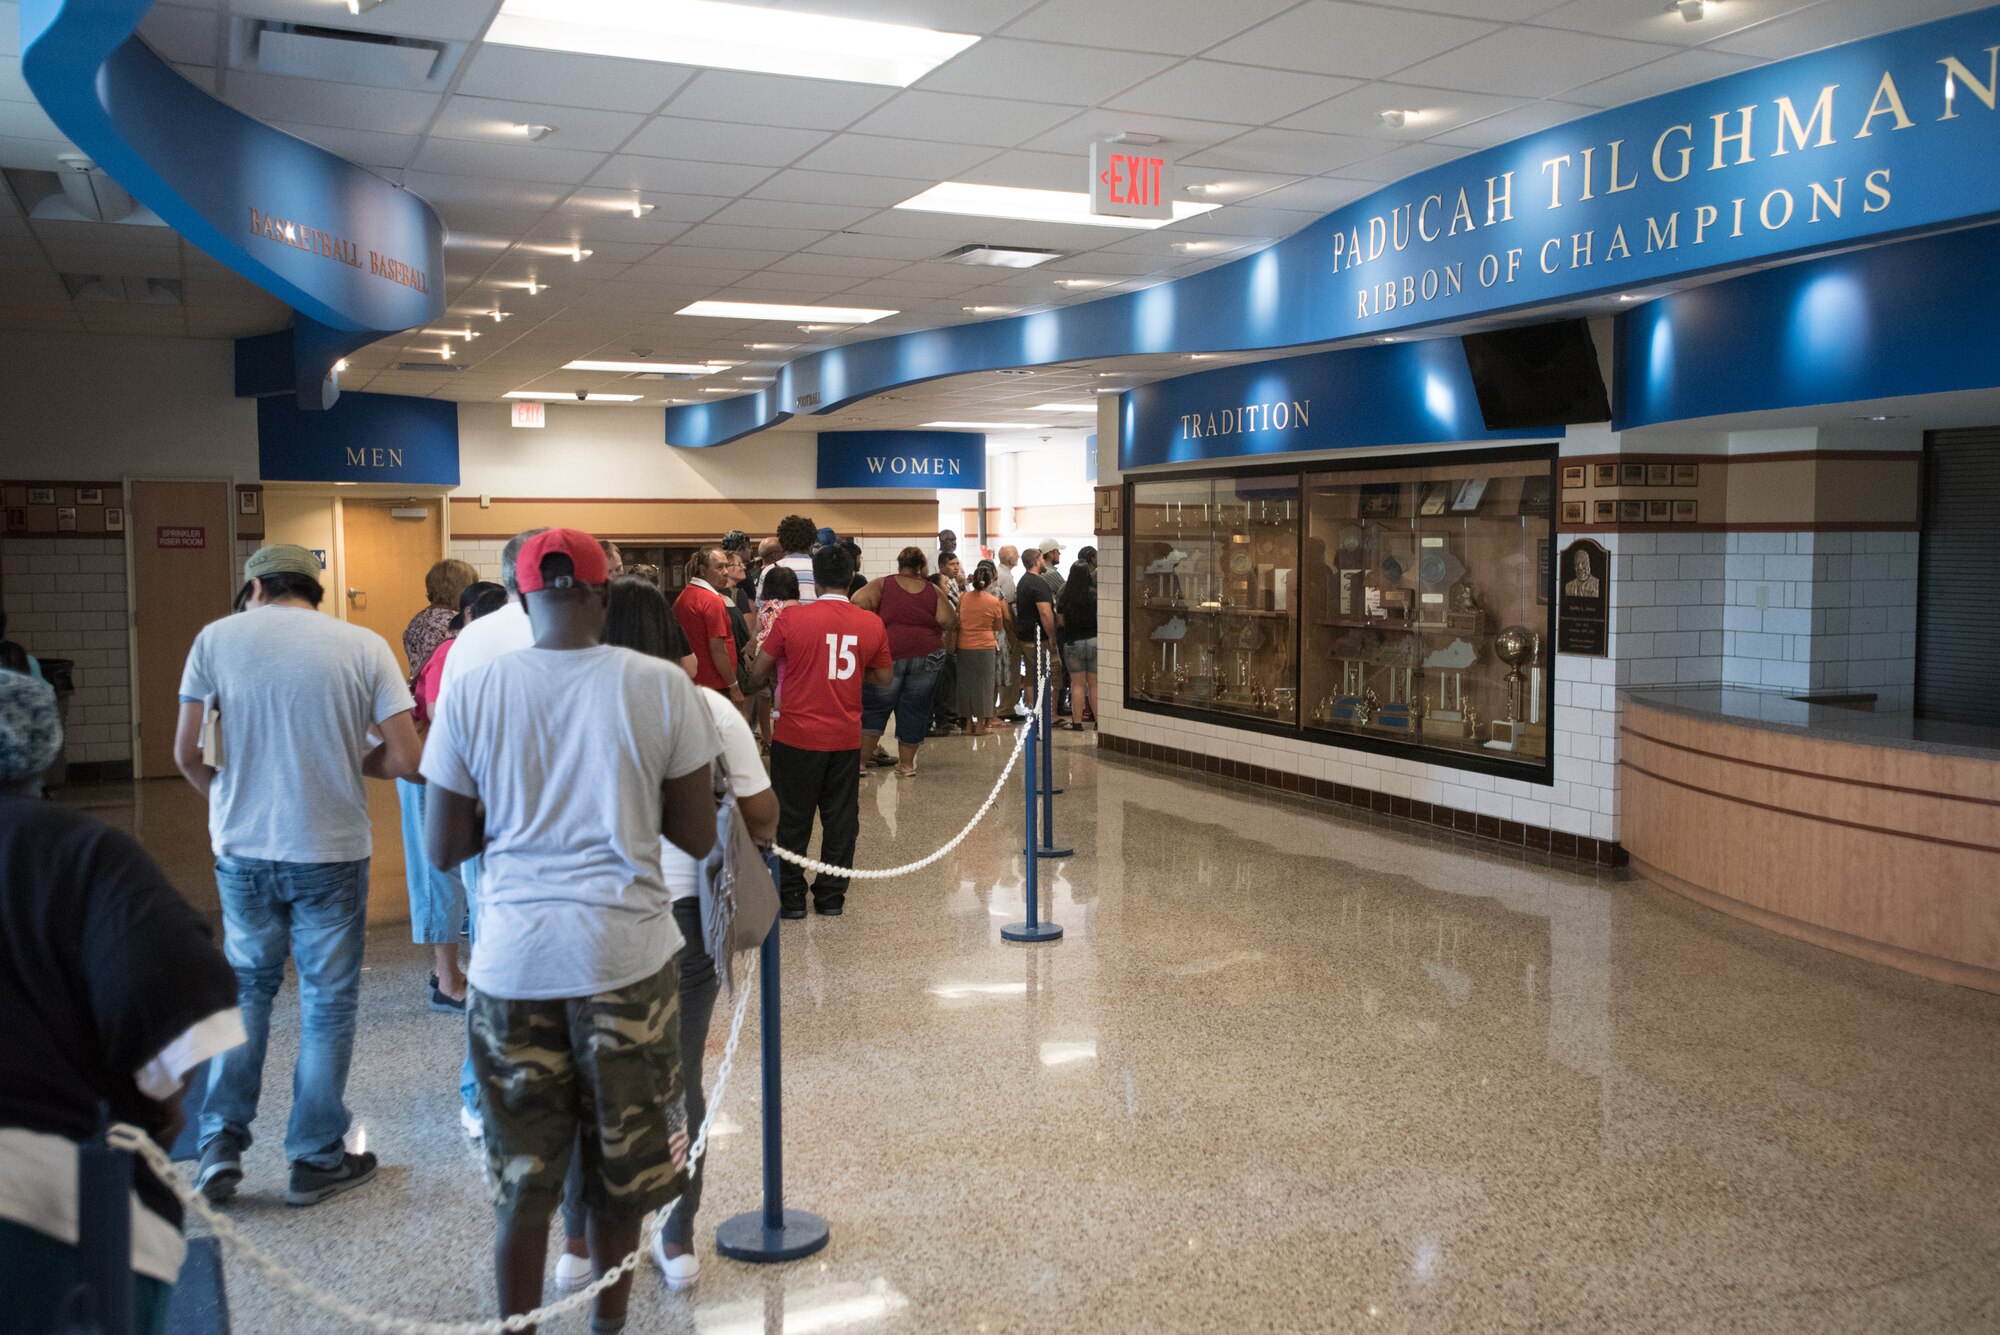 Western Kentucky residents line up to receive no-cost medical, dental and optical care at Paducah Tilghman High School in Paducah, Ky., July 23, 2016. The services are being offered by members of the Air National Guard and U.S. Navy Reserve from July 18 to 27 as part of a program called Bluegrass Medical Innovative Readiness Training. 
The Kentucky Air National Guard is serving as the lead unit for the program, which is a partnership between the U.S. Department of Defense and the Delta Regional Authority. (U.S. Air National Guard photo by Master Sgt. Phil Speck)